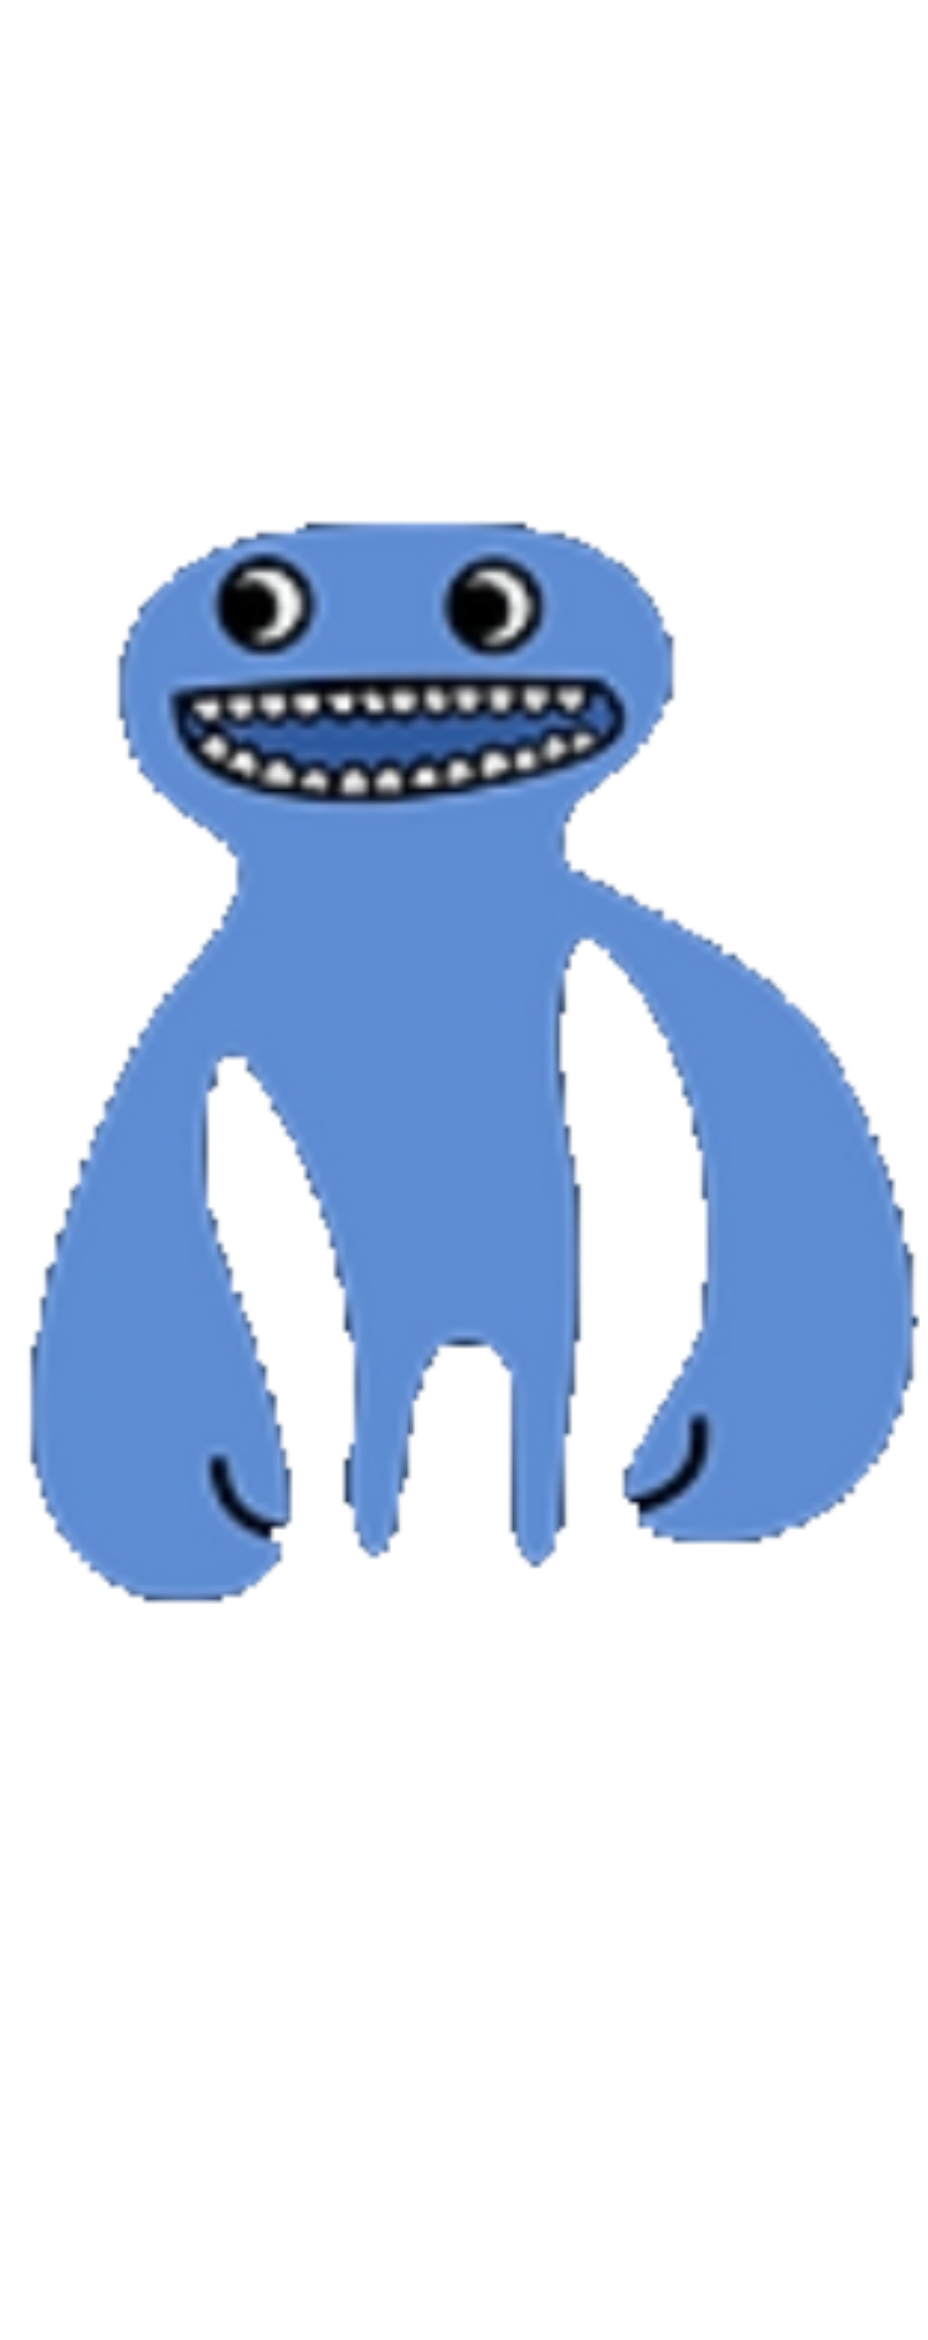 Jumbo Josh Blue png by Coenisawesome on DeviantArt